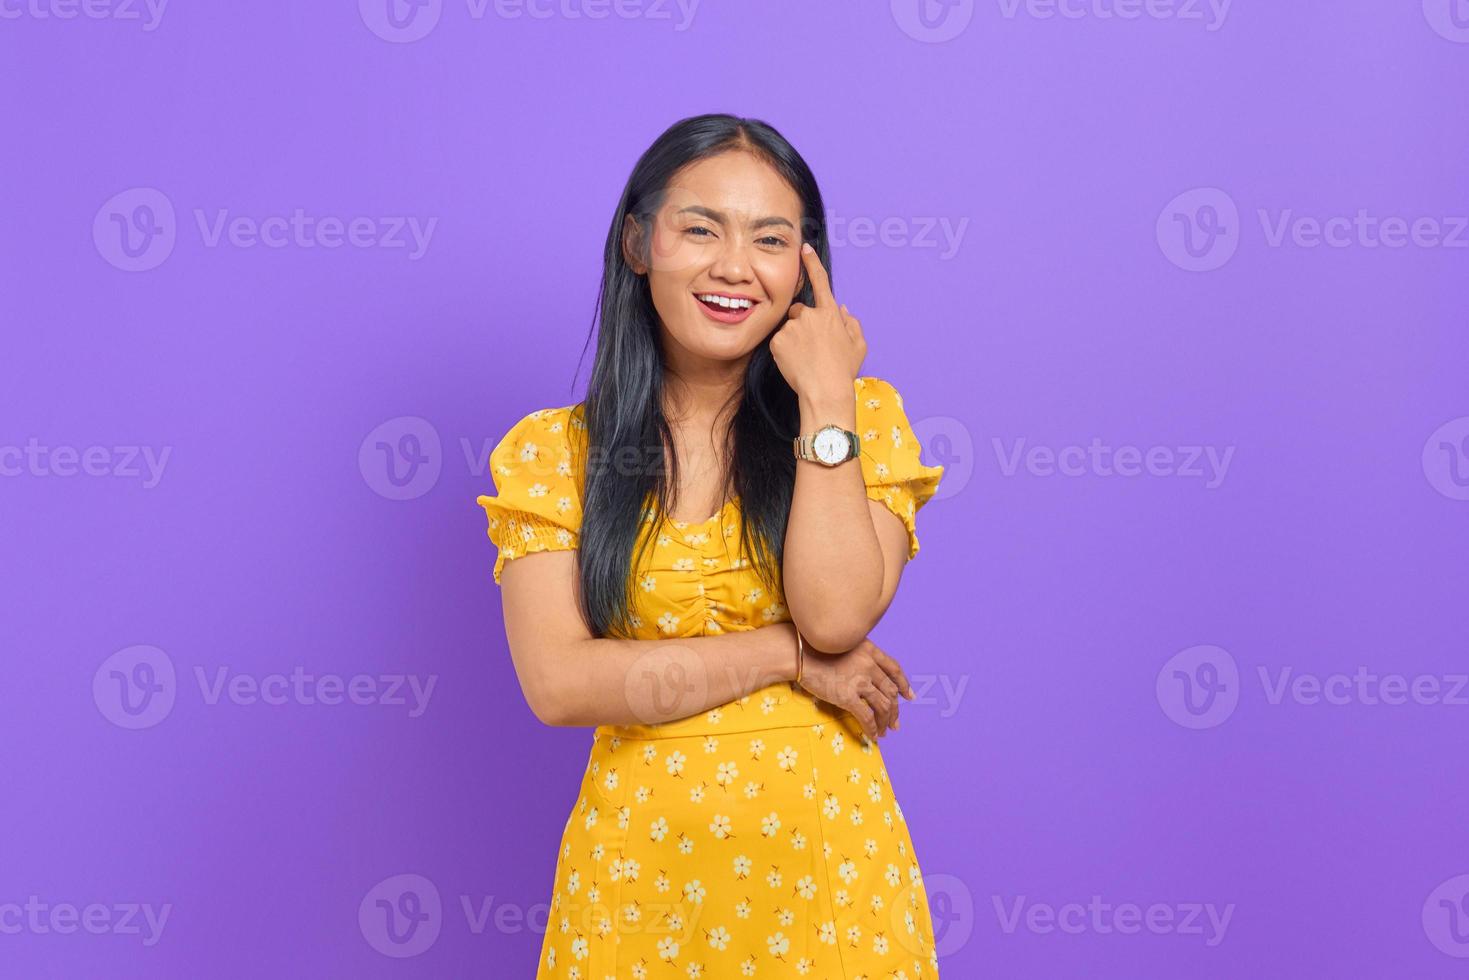 Smiling young Asian woman wearing yellow dress and looking confident on purple background photo